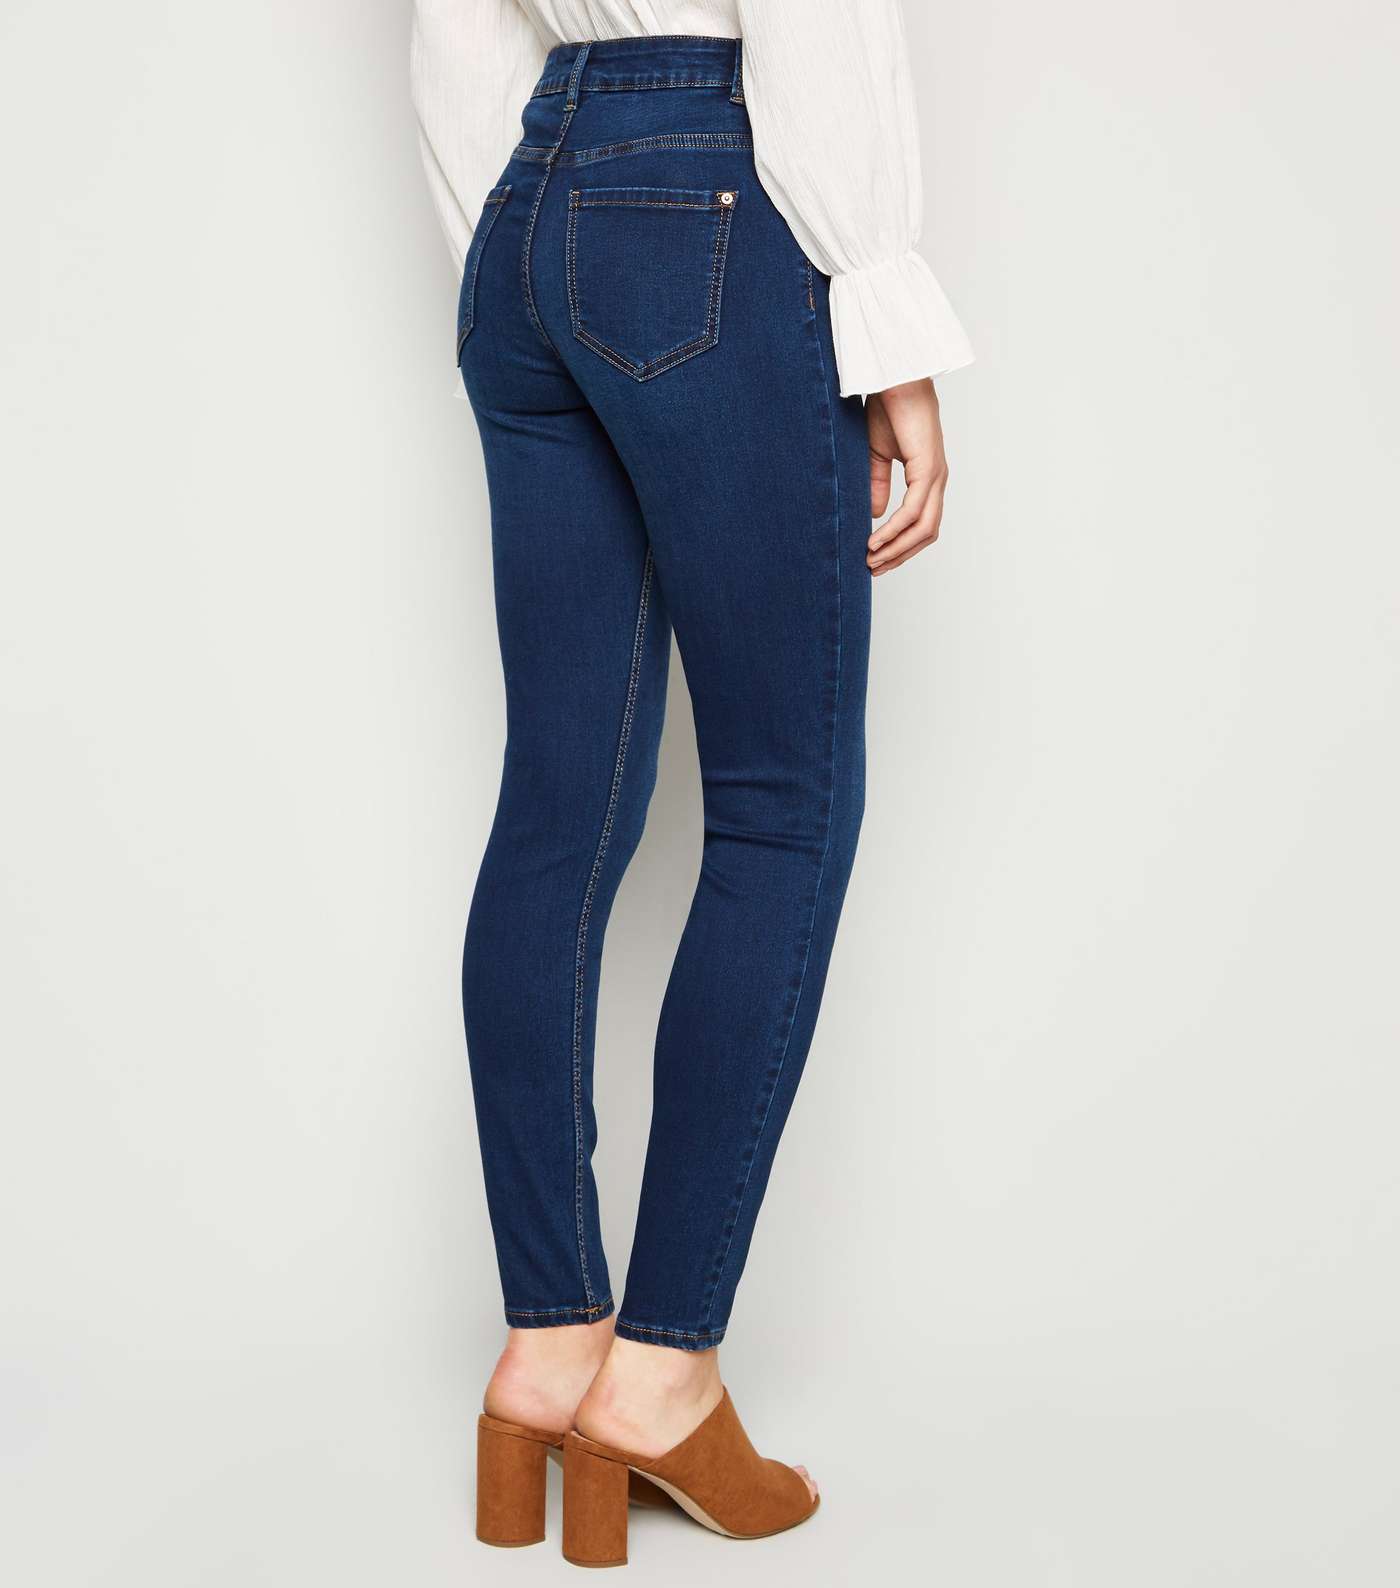 Blue Rinse Wash Mid Rise India Super Skinny Jeans Image 5